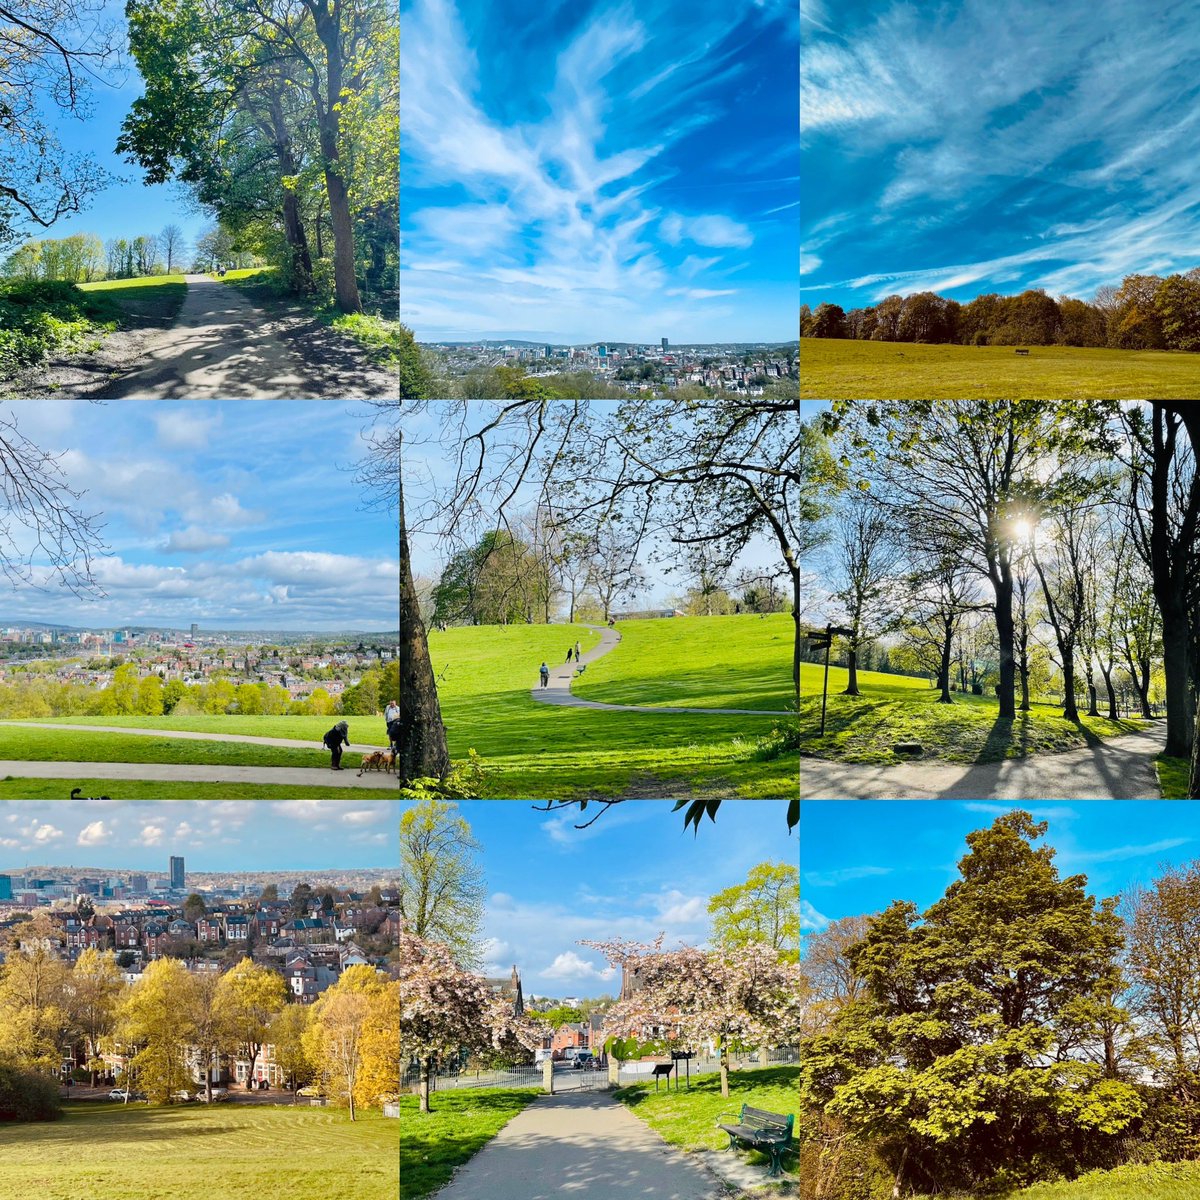 We’re so lucky to have so many parks & green spaces in Sheffield. It’s the greenest city in England y’know. #loveparks @ParksSheffield @katejosephs @tomhunt100